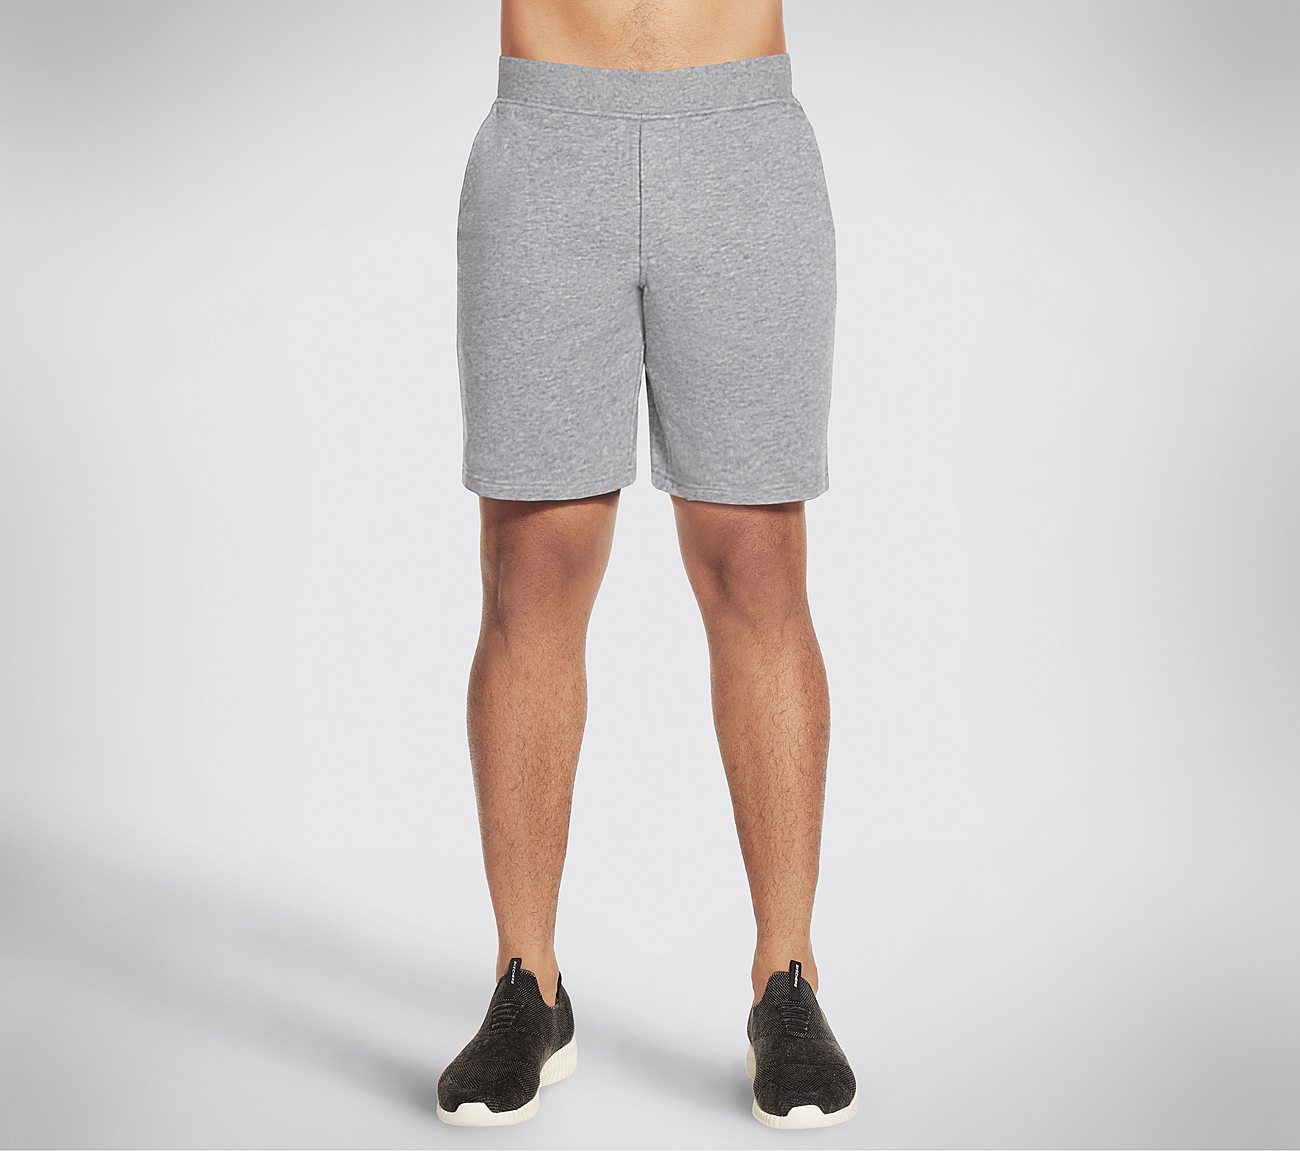 EXPLORER 9IN SHORT, LIGHT GREY Apparels Lateral View